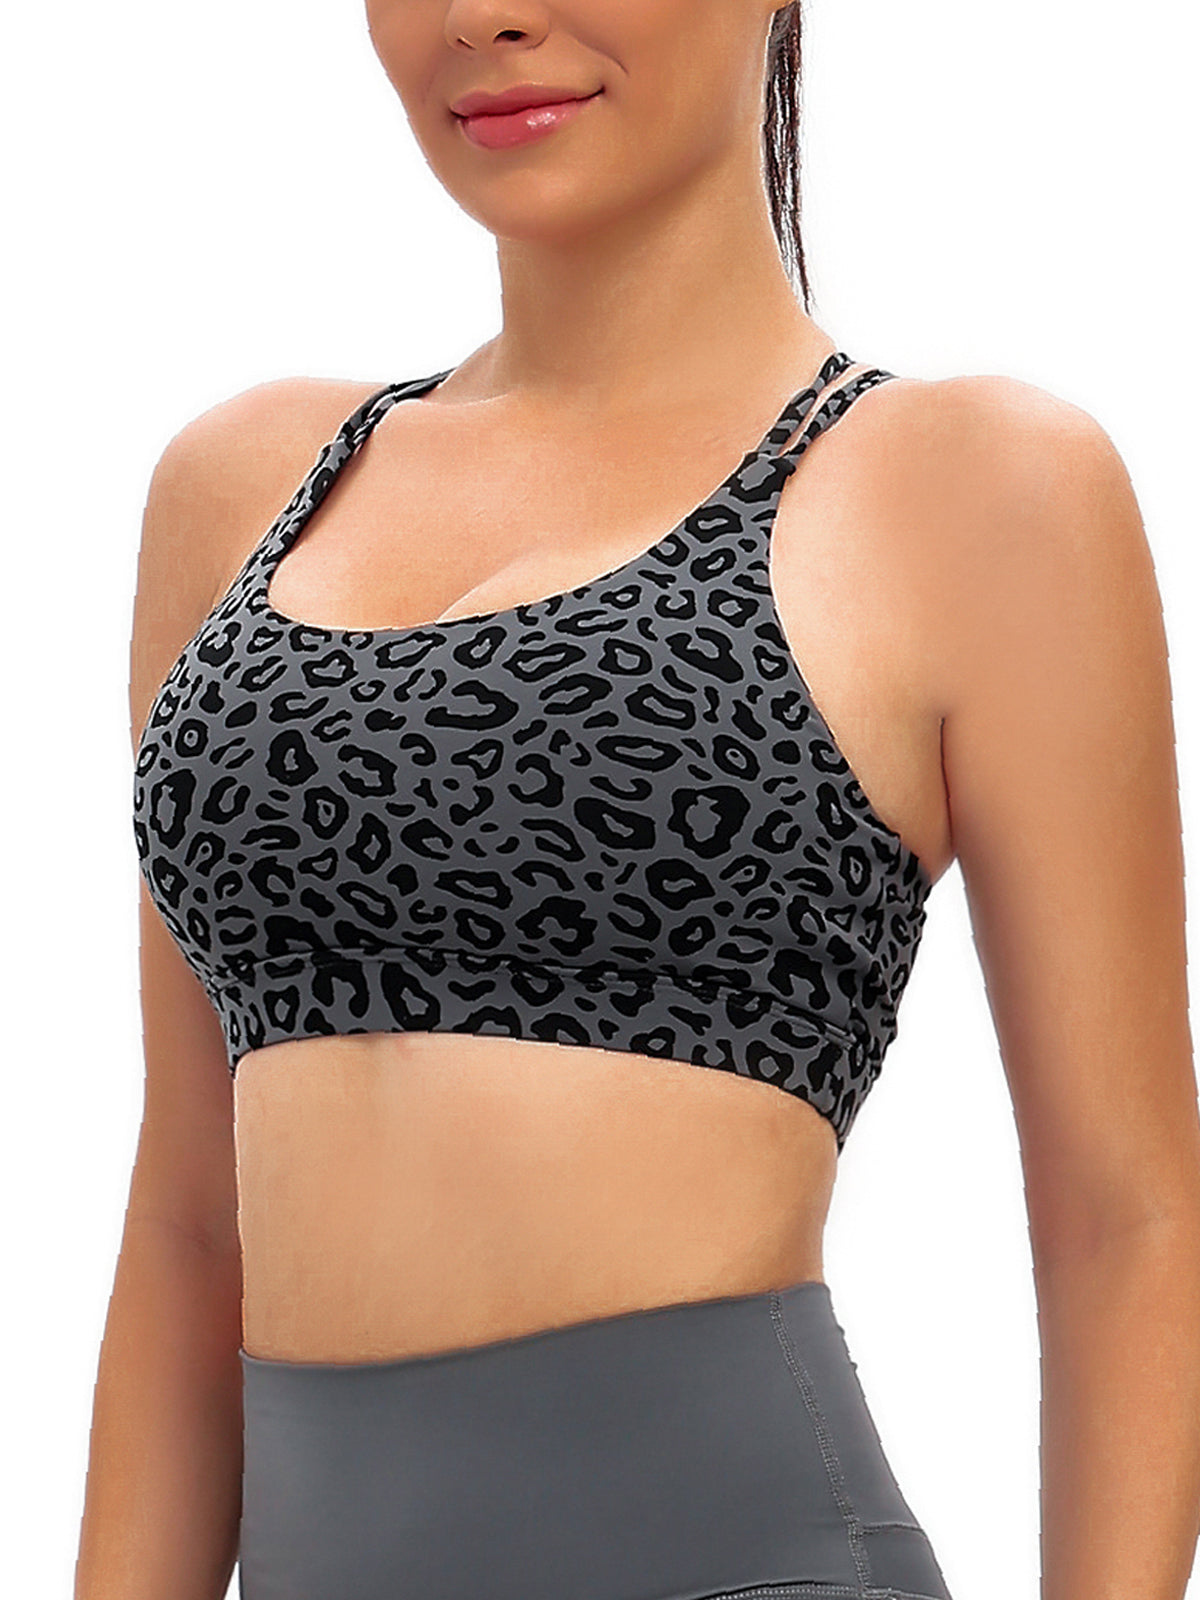 Sports Bras Padded Yoga Tank Top Leopard Print Workout Tops